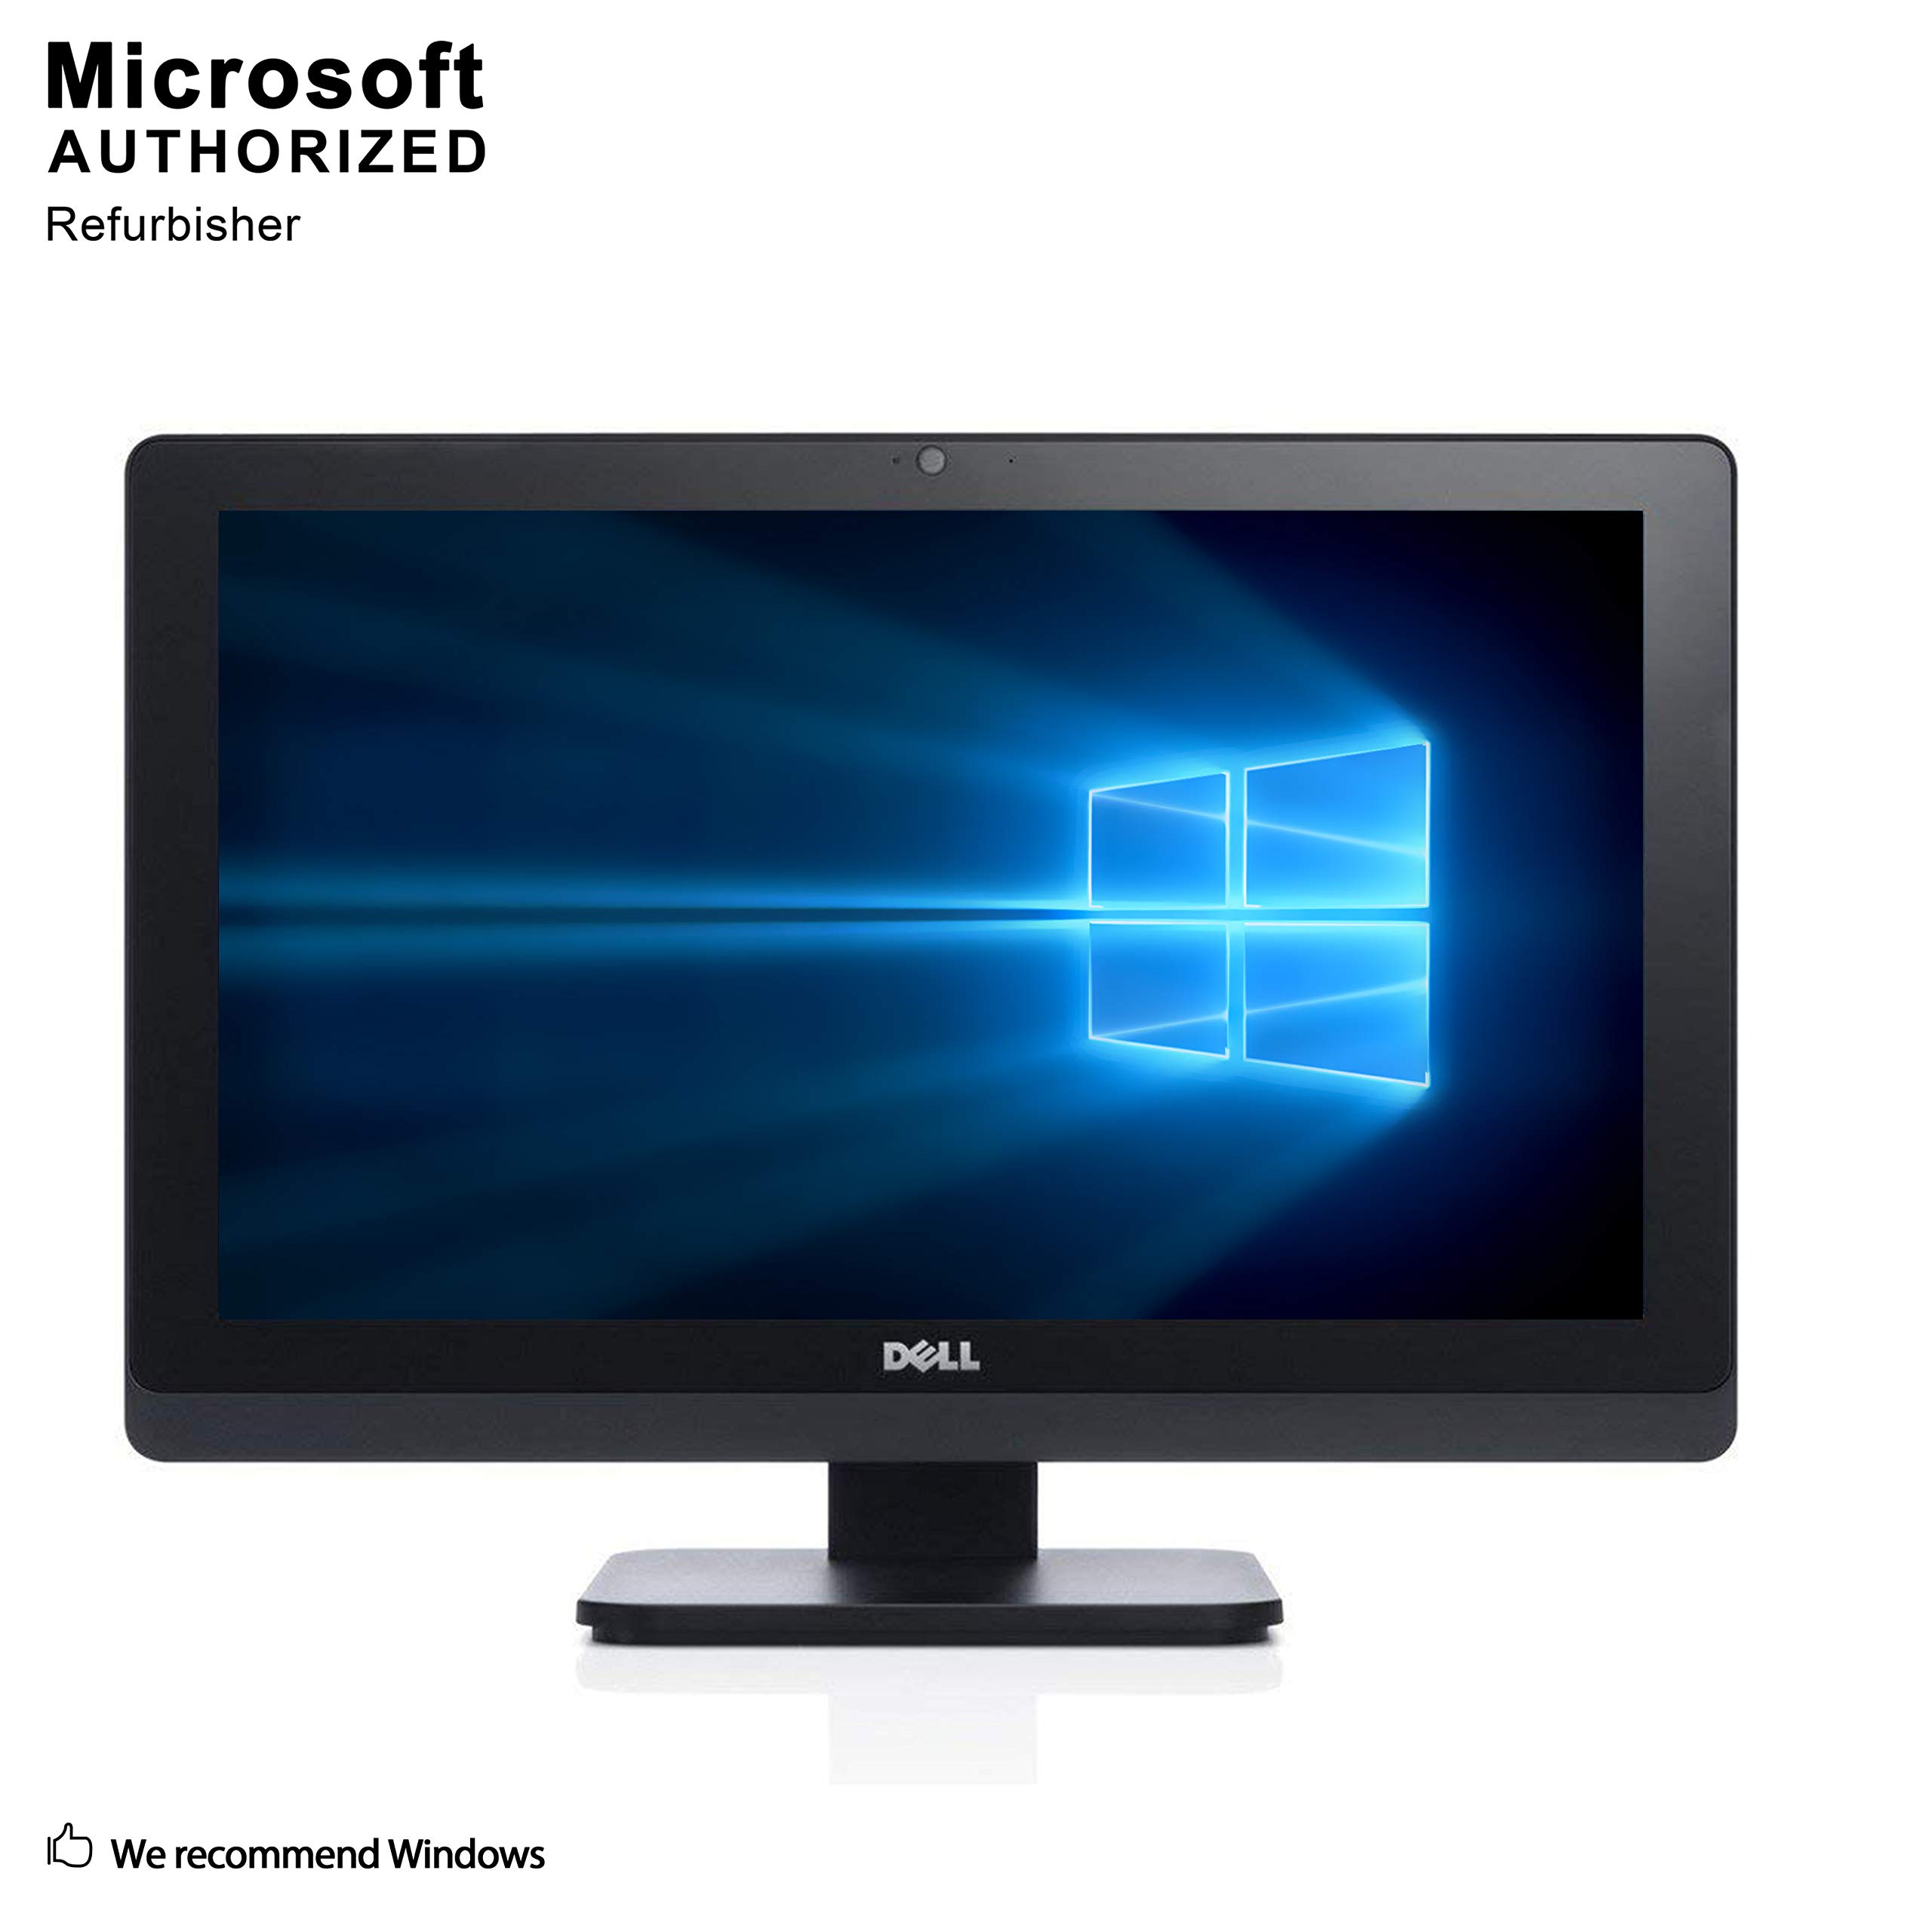 Dell OptiPlex 3011 All-in-one 20 Inch Screen PC, Intel Core i3 3220 3.3GHz, 4G DDR3L, 500G, WiFi, BT 4.0, Windows 10 64-Multi-Language Support English/Spanish/French(Renewed)